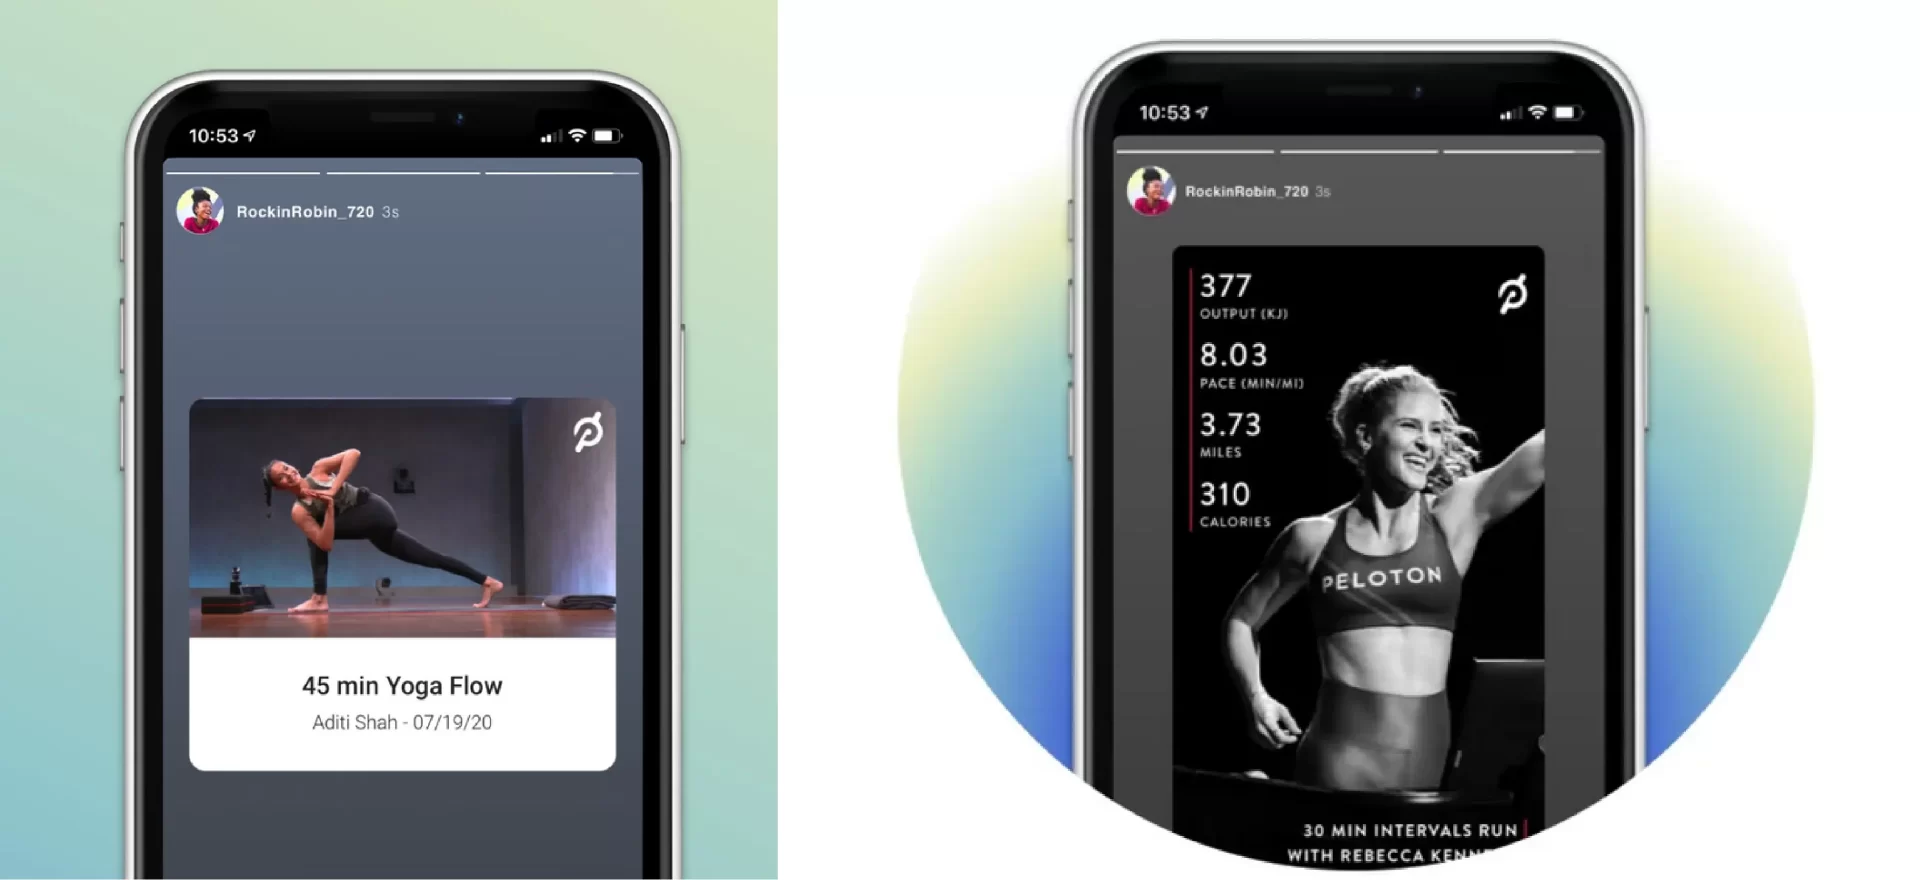 How To Share Peloton Rides on Instagram?